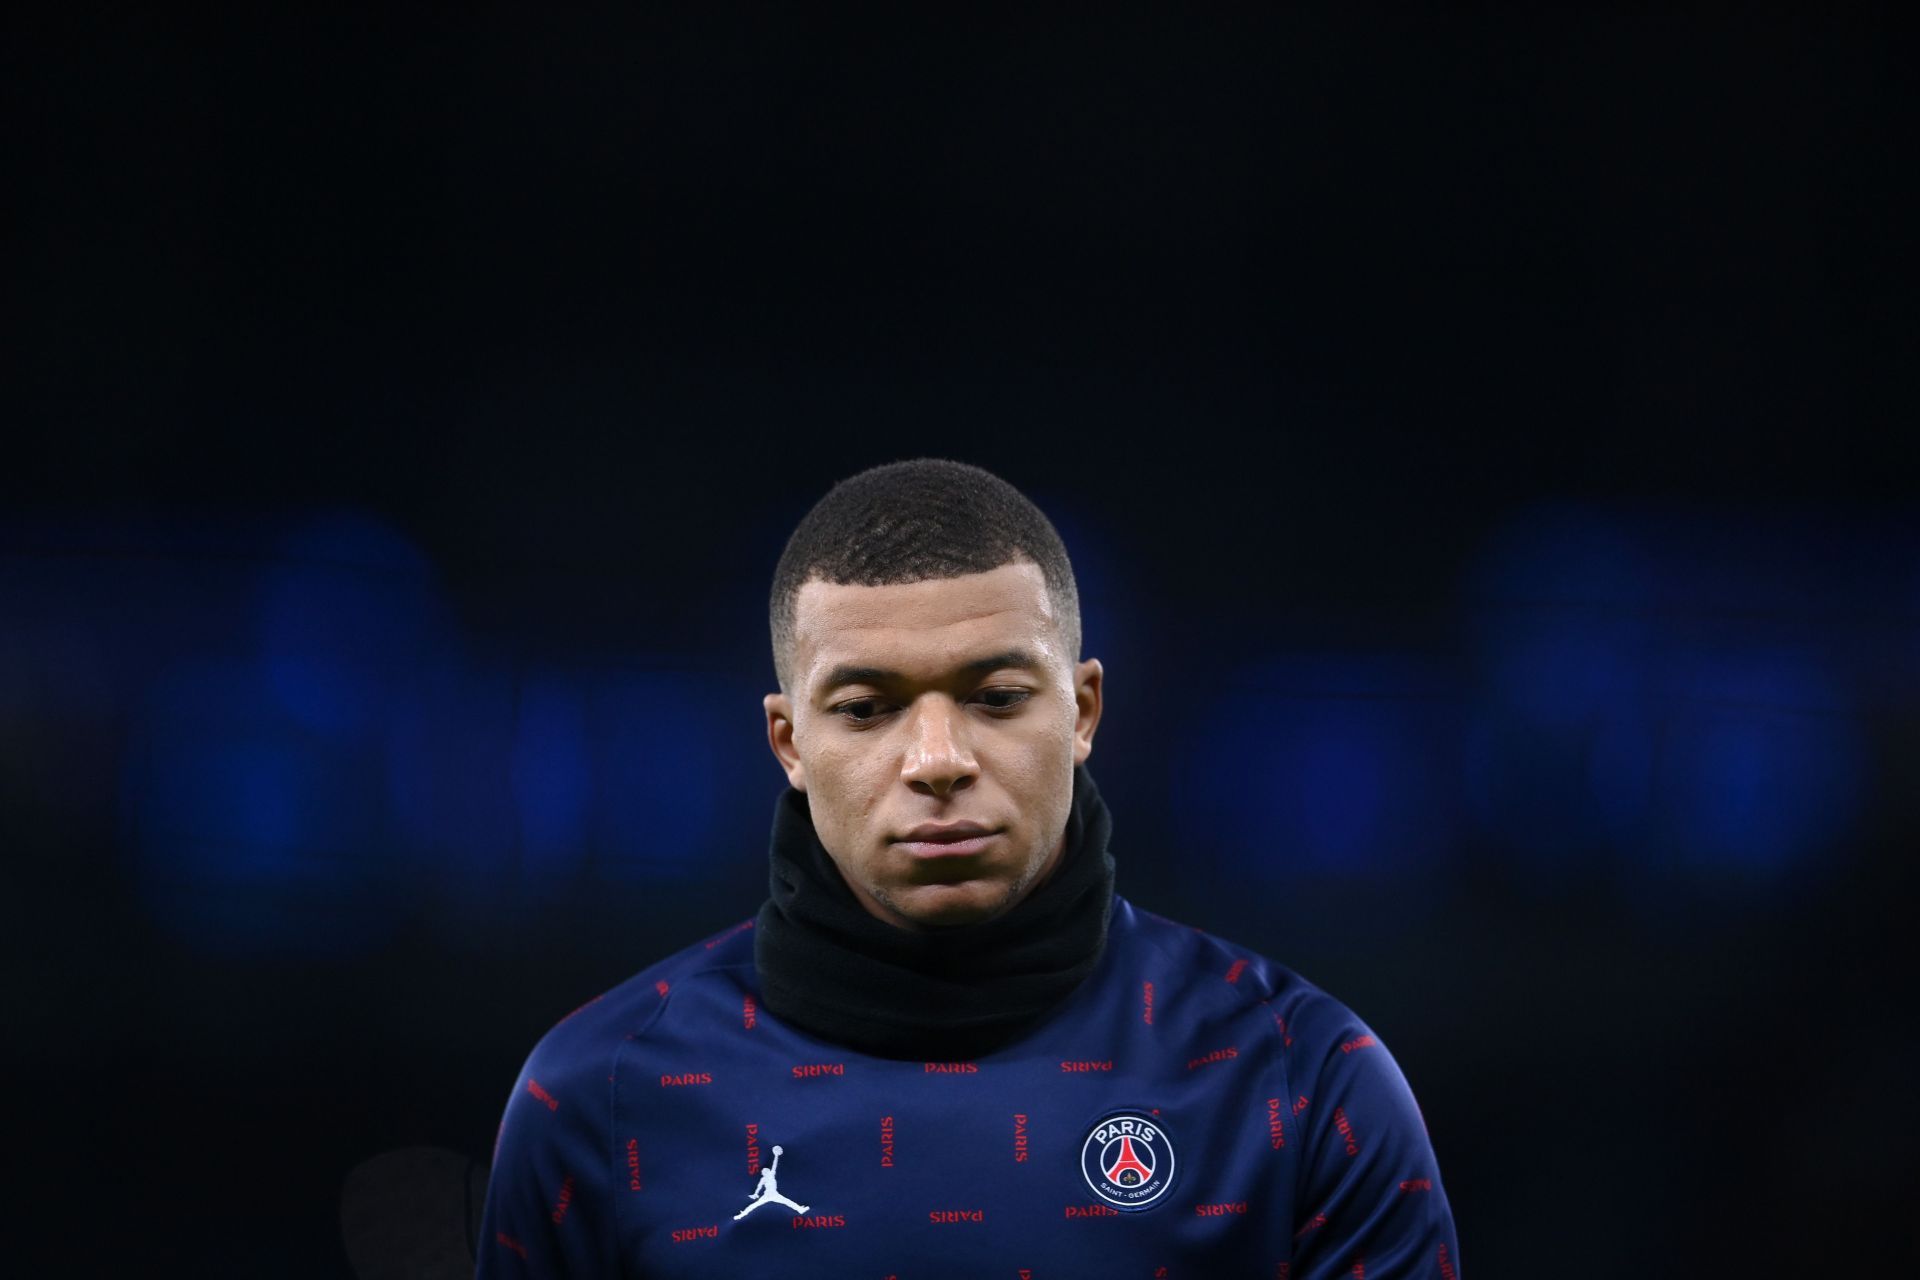 Real Madrid have submitted a &euro;50 million bid to sign Mbappe this month.